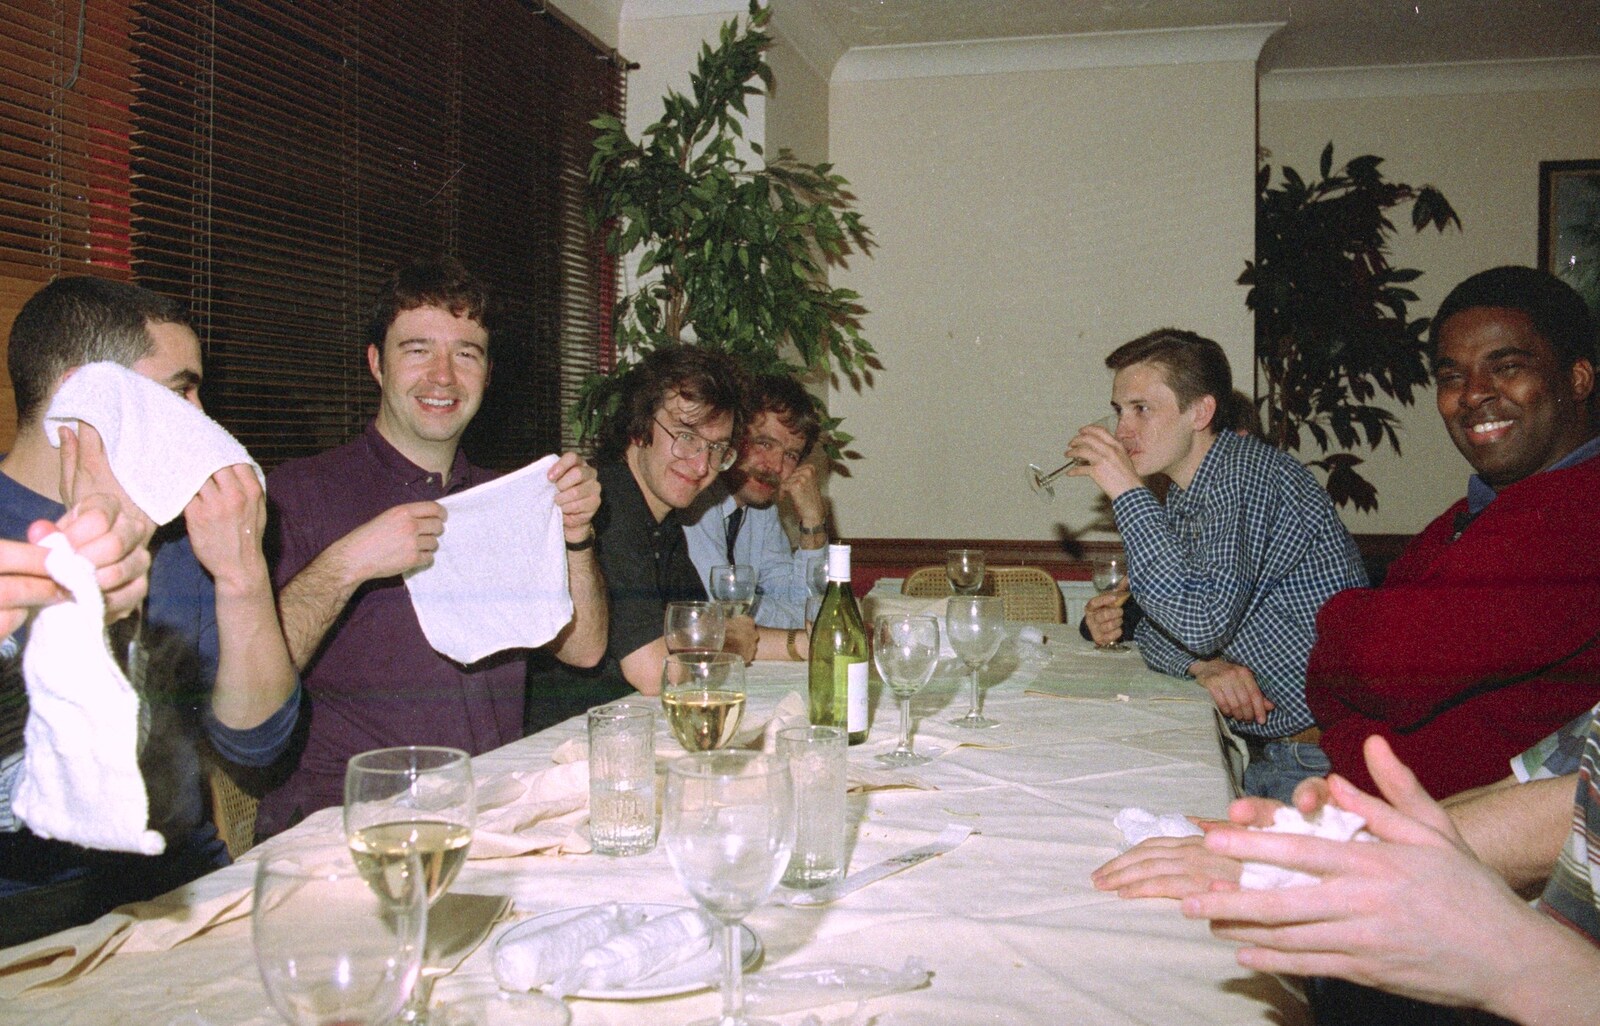 Tim, Phil, Andrew and Carl from CISU: A Chinese Restaurant and SCC Sports Day, Ipswich and Norwich - 1st May 1997